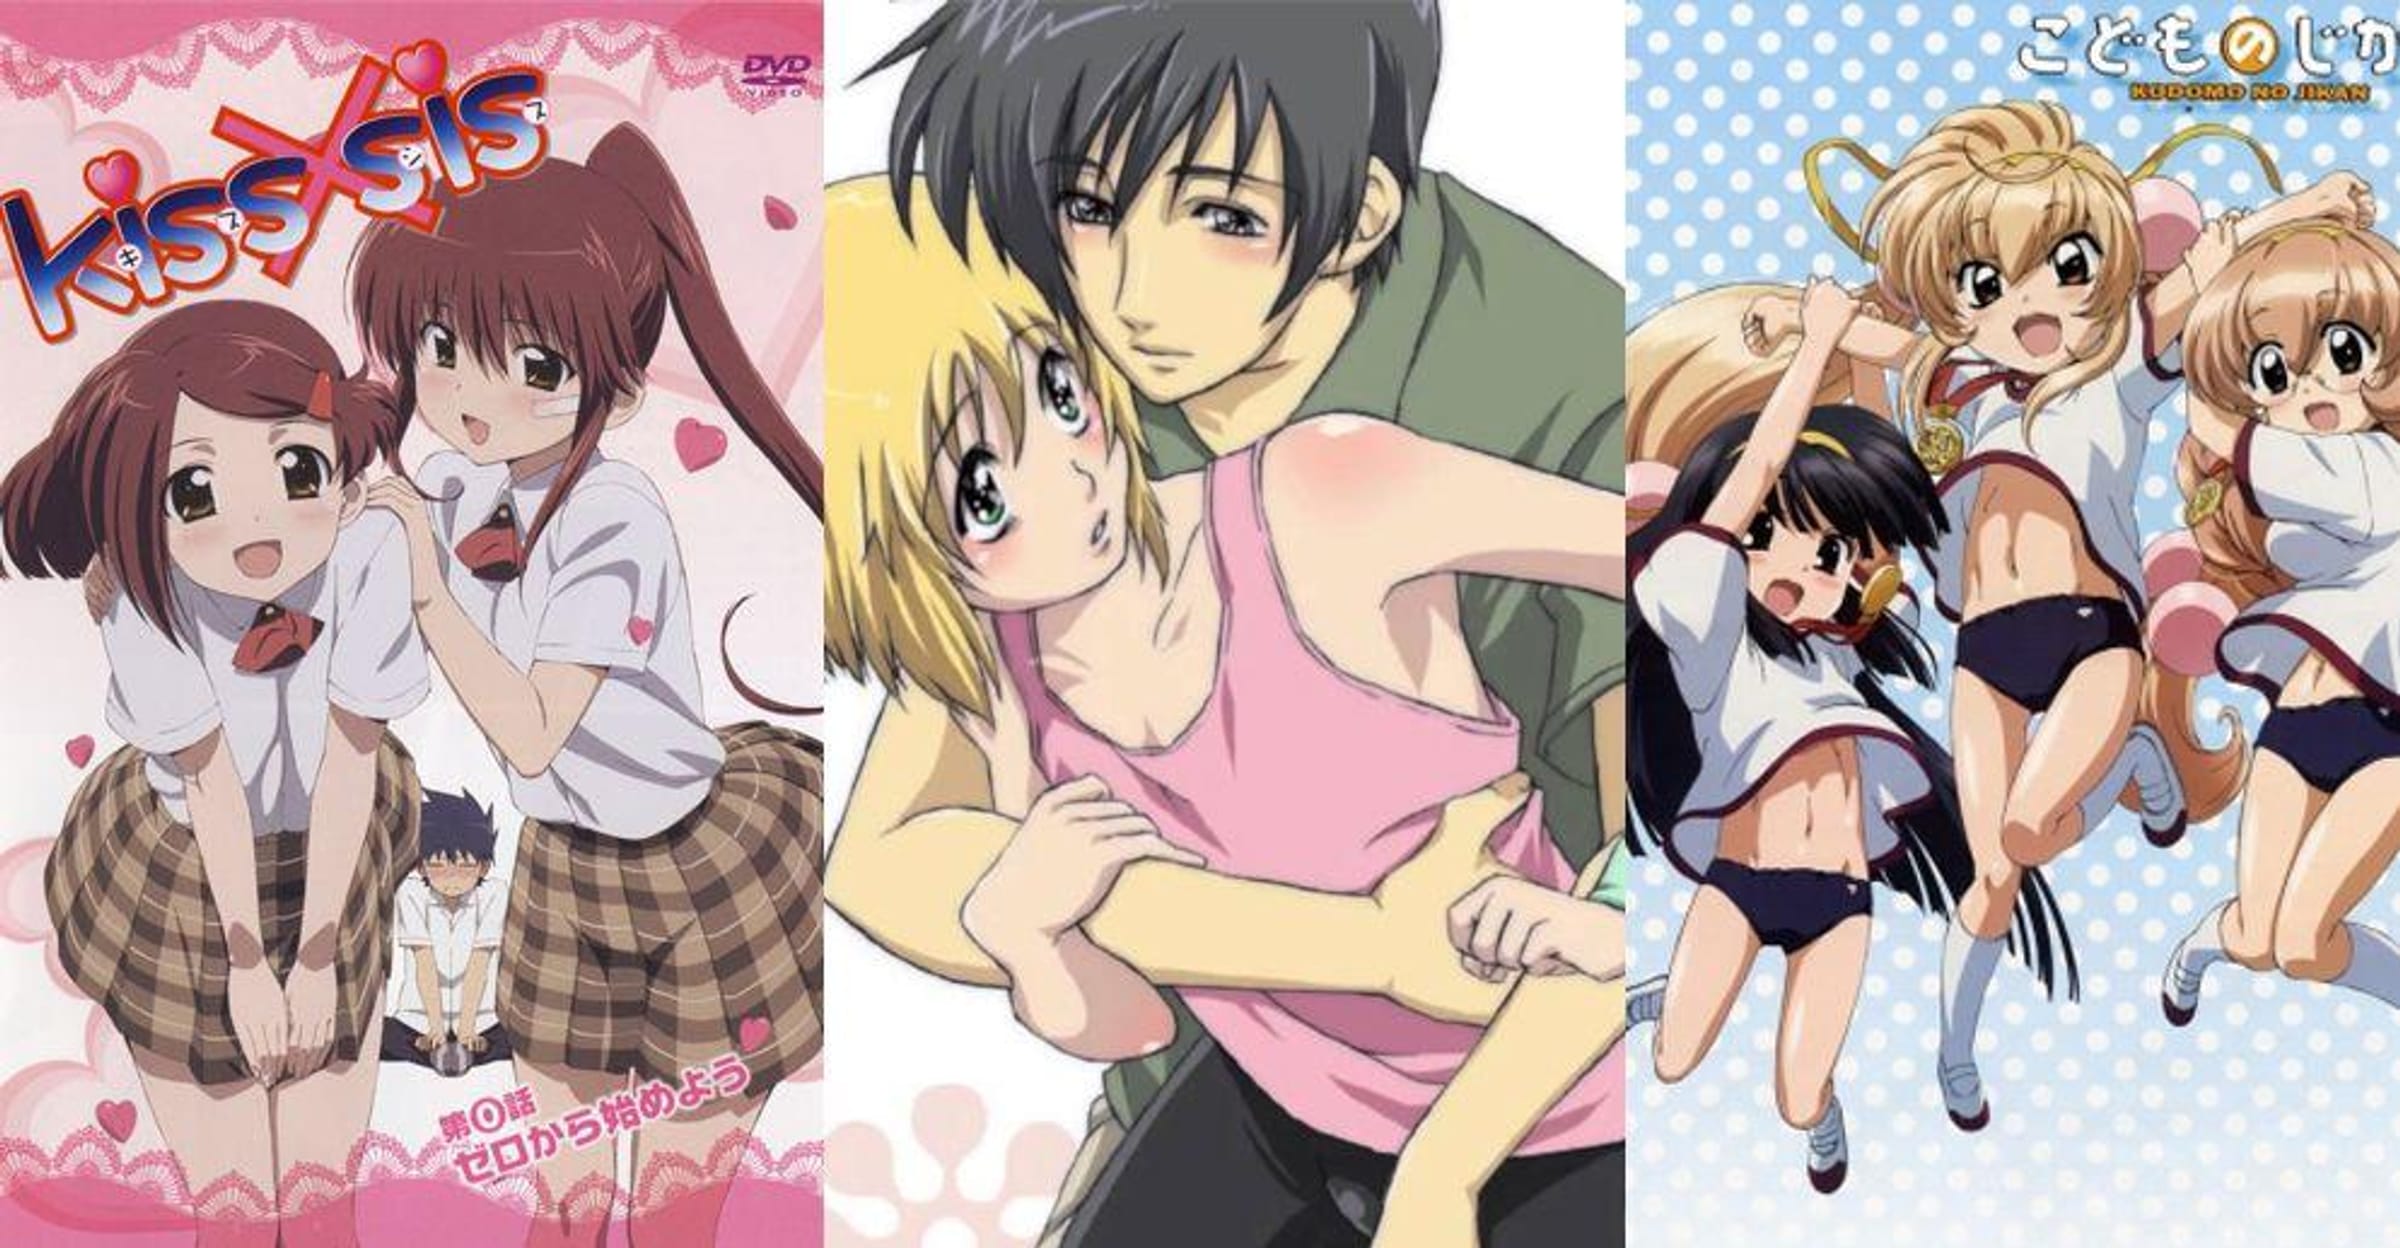 Hugging Daddy Anime Porn - The 16 Disturbing Romantic Anime Relationships of All Time